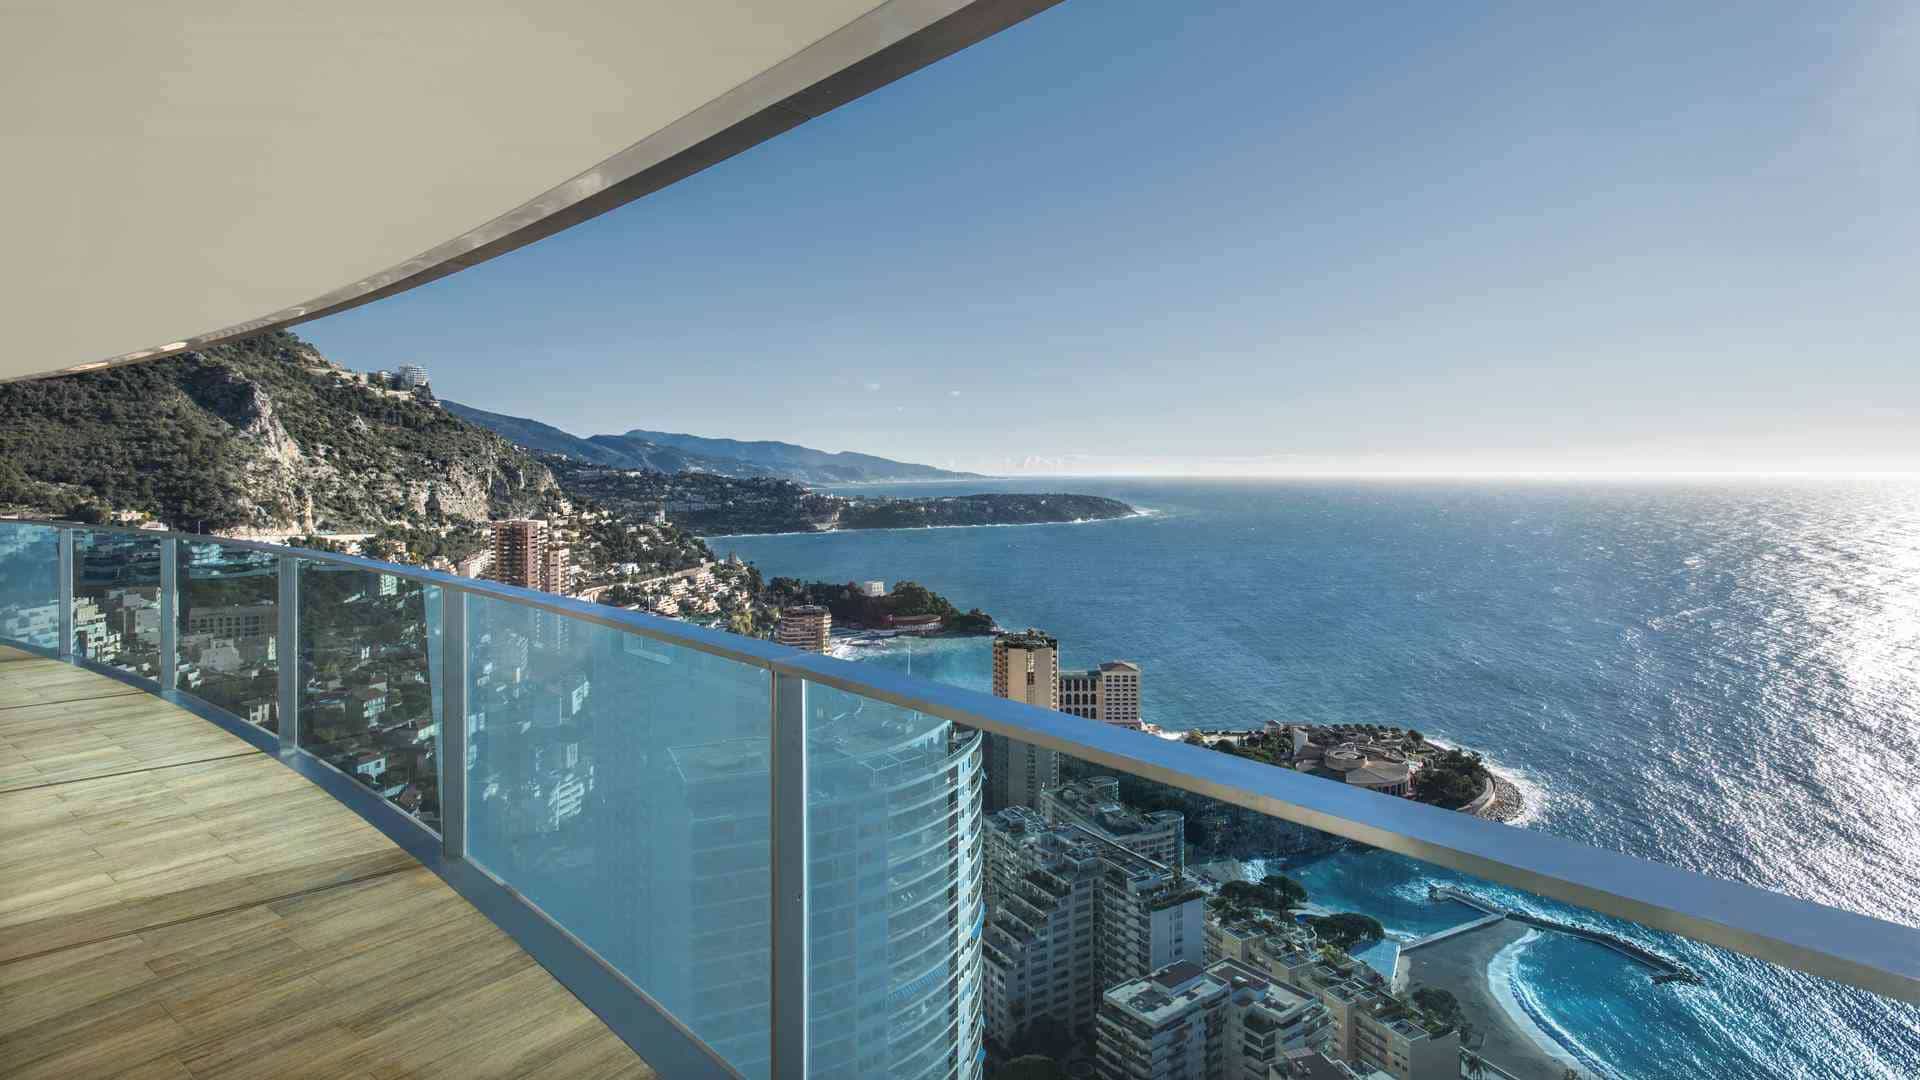                                                                                                                                         LUXURIOUS 5-ROOM APARTMENT, BREATHAKING VIEW OVER MONACO BAY                                                                    
                                                             